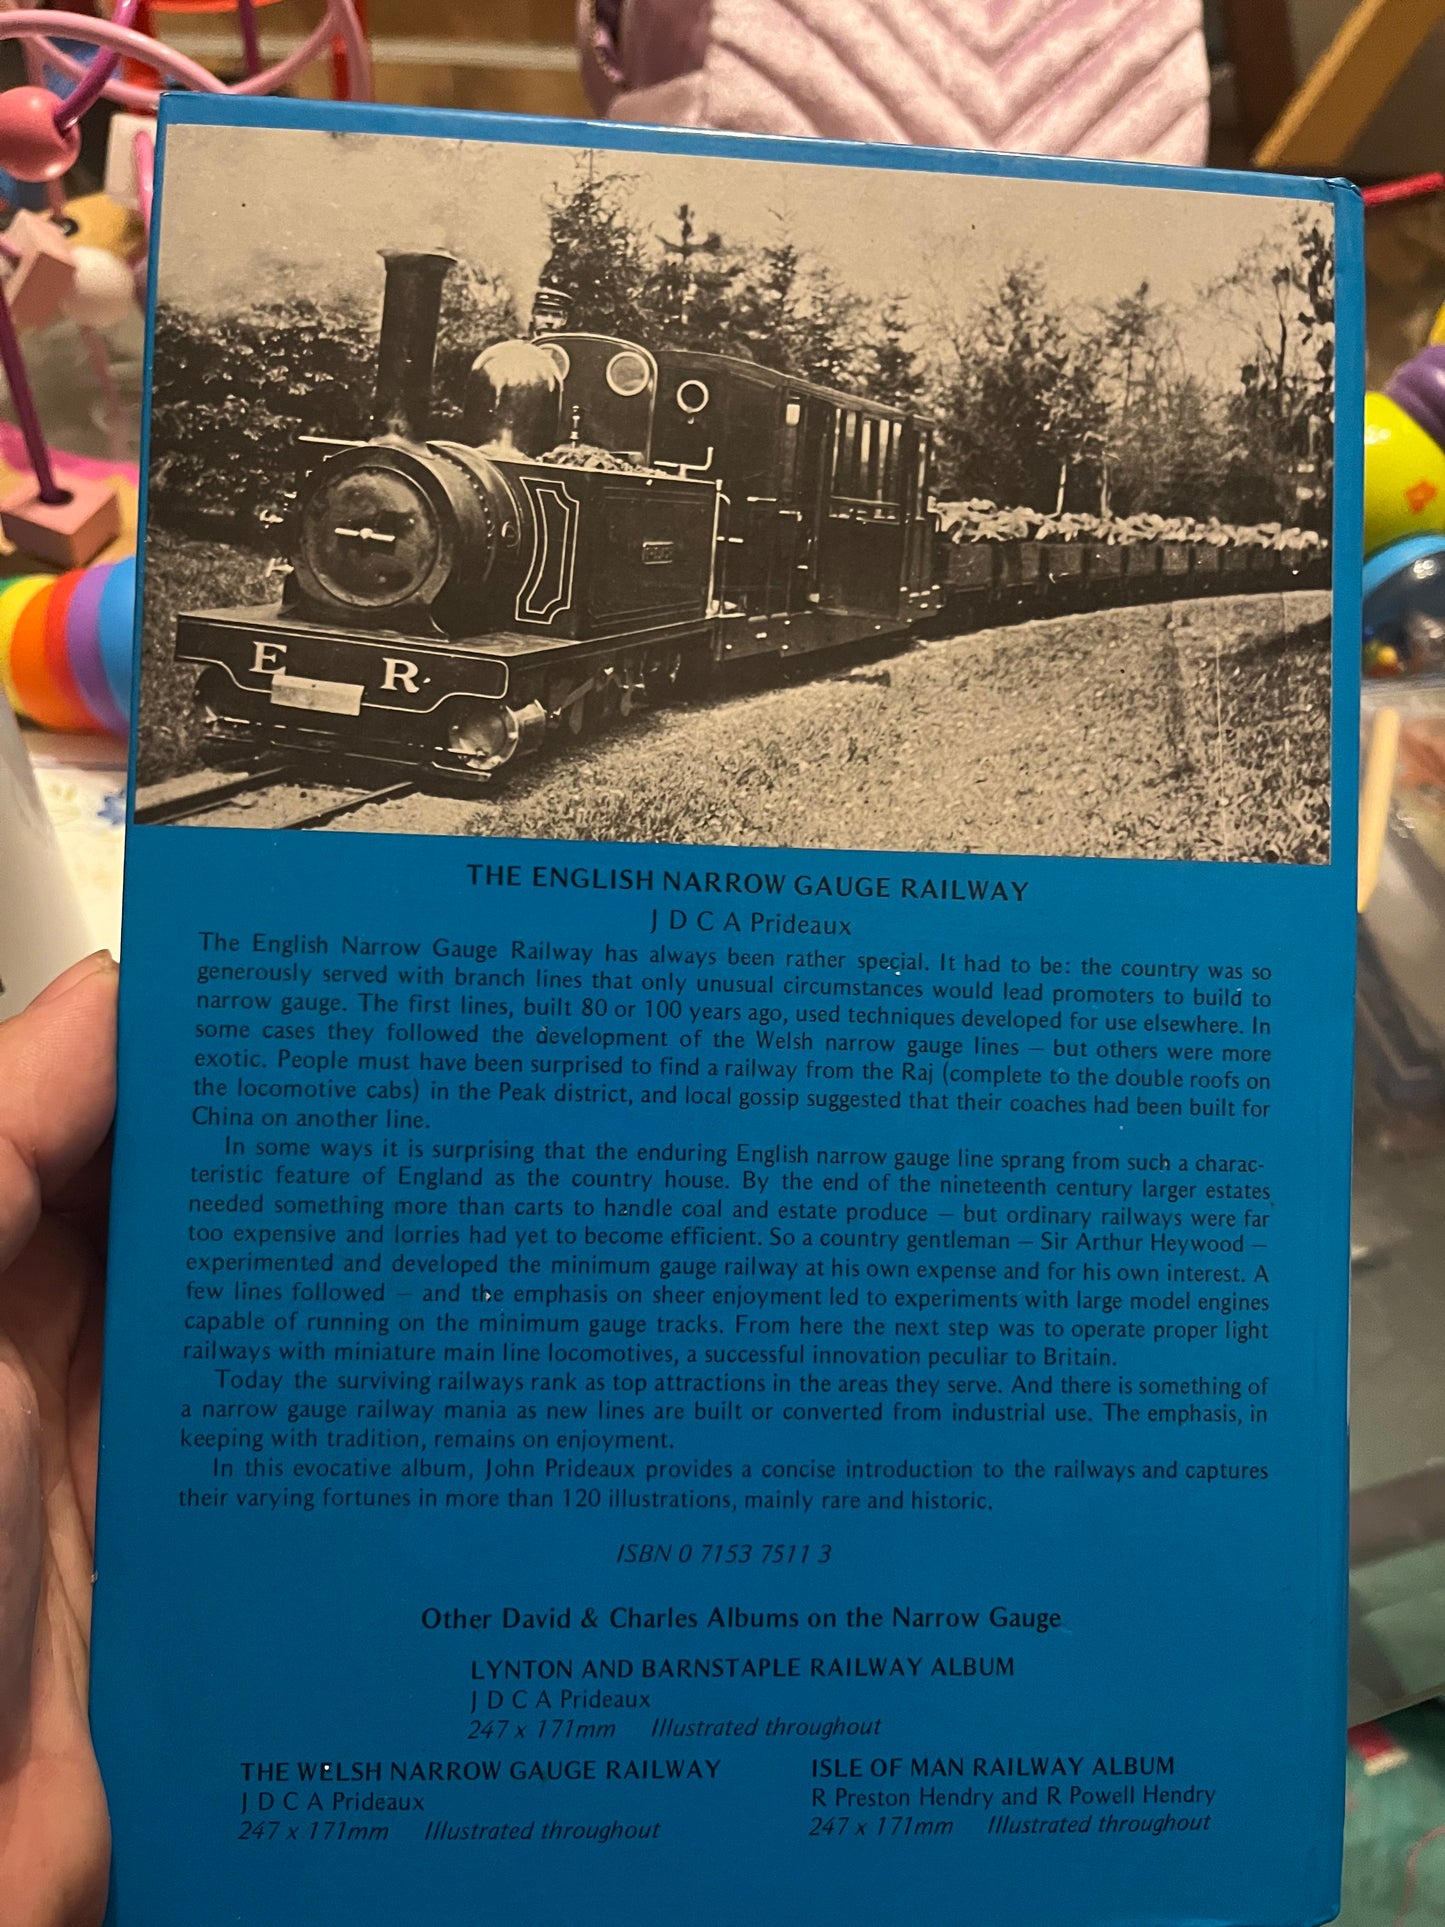 The English Narrow Gauge Railway, A Pictorial History